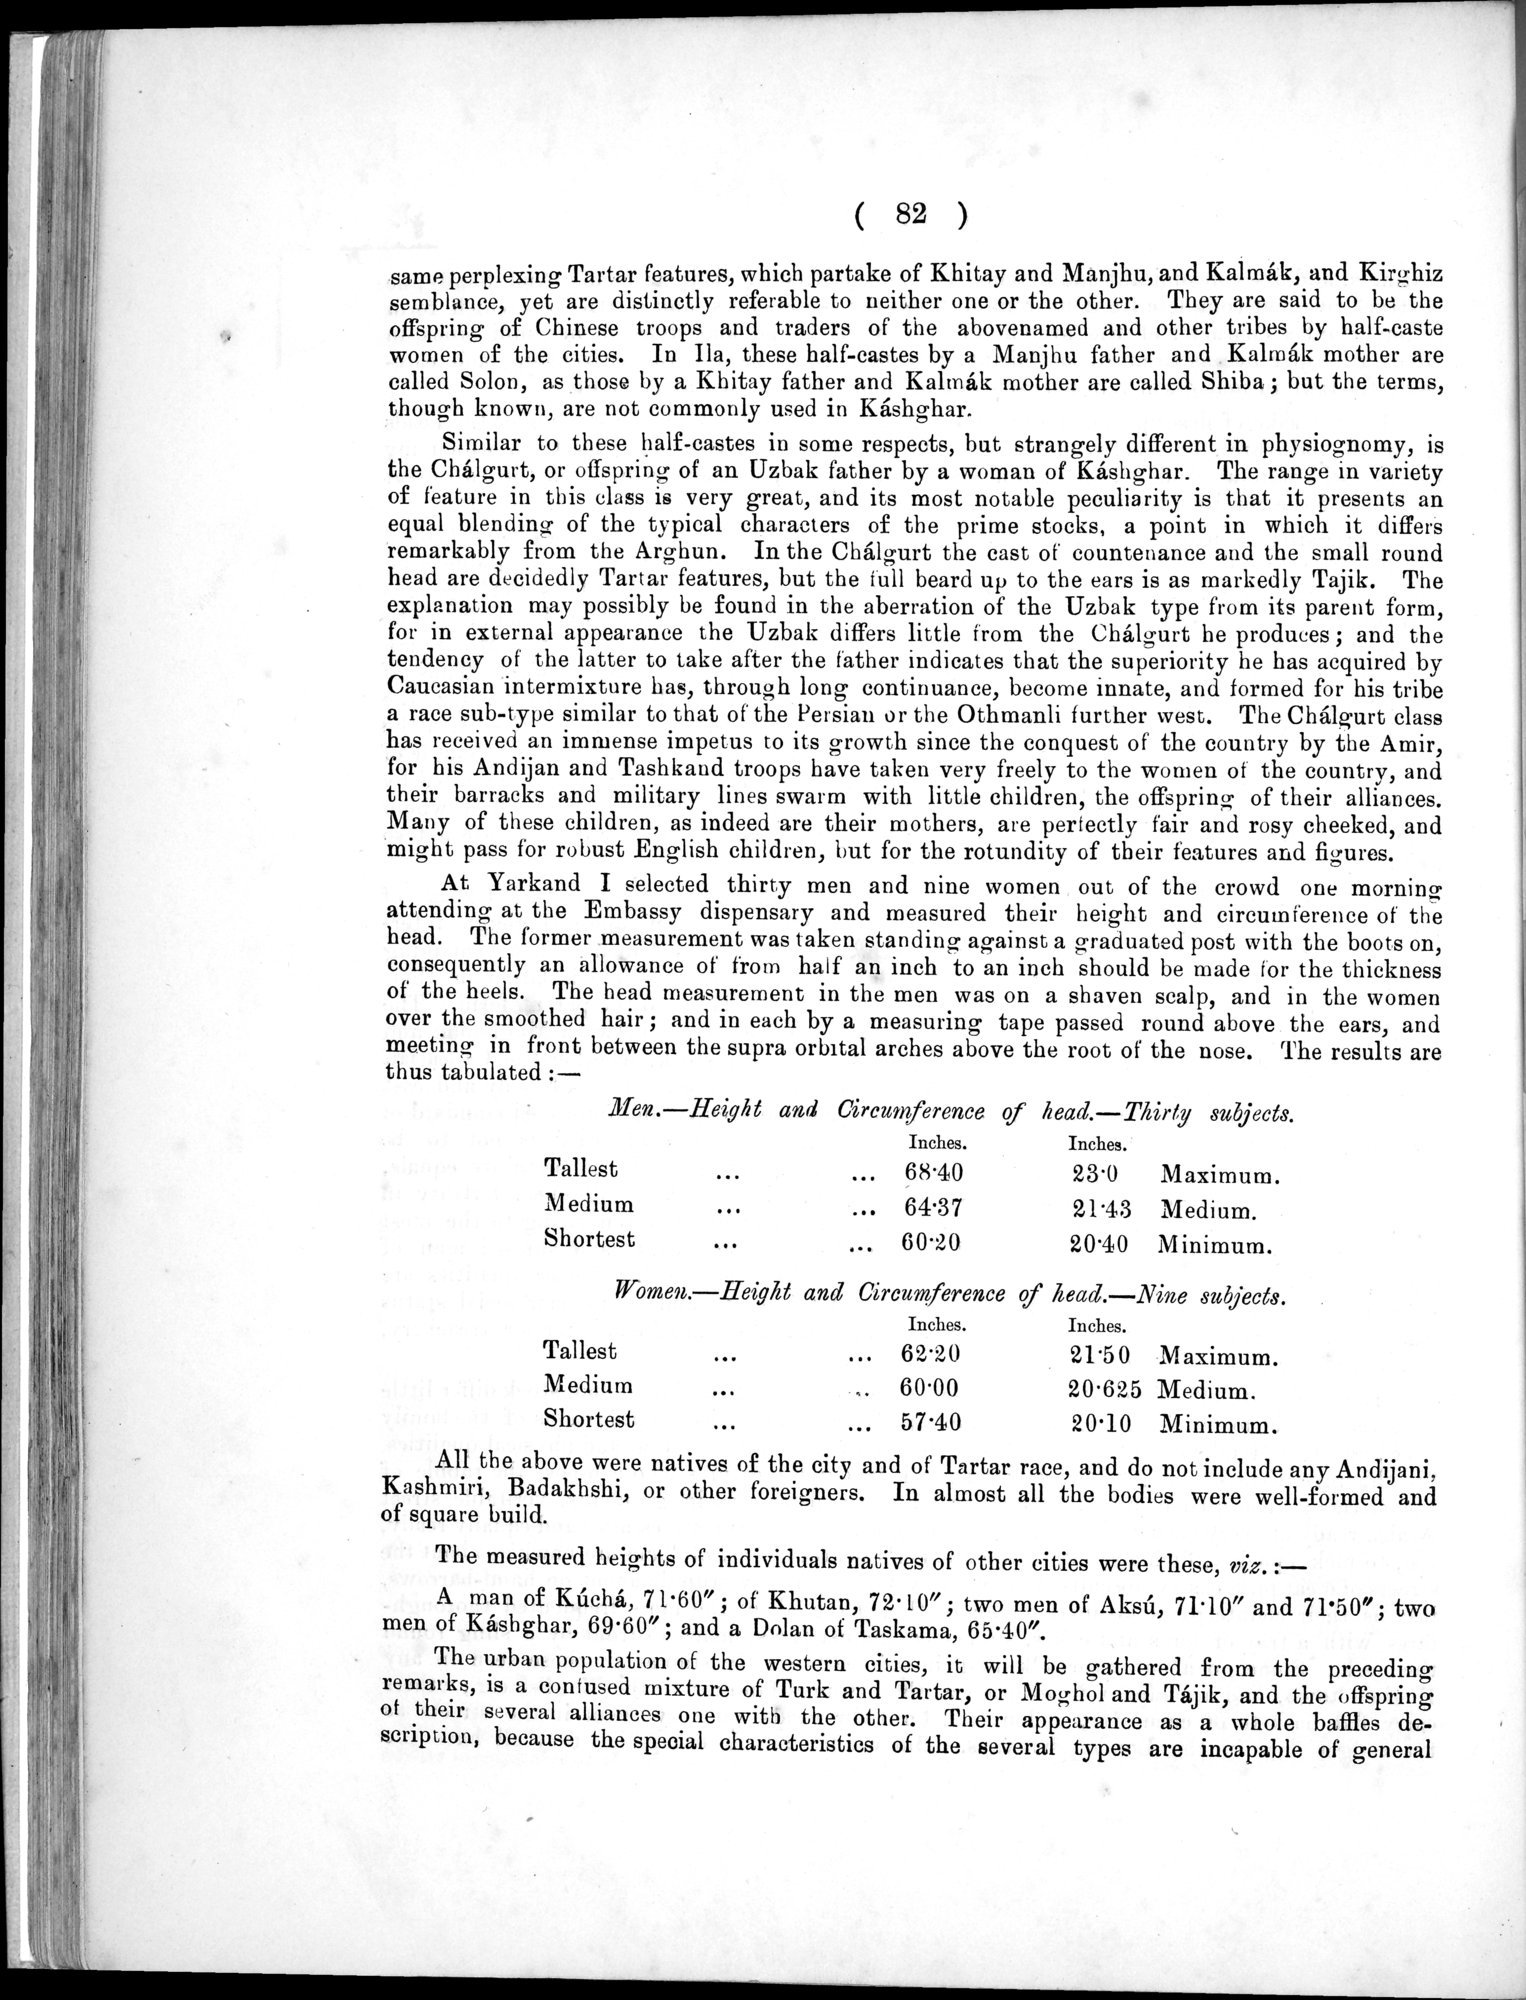 Report of a Mission to Yarkund in 1873 : vol.1 / Page 130 (Grayscale High Resolution Image)